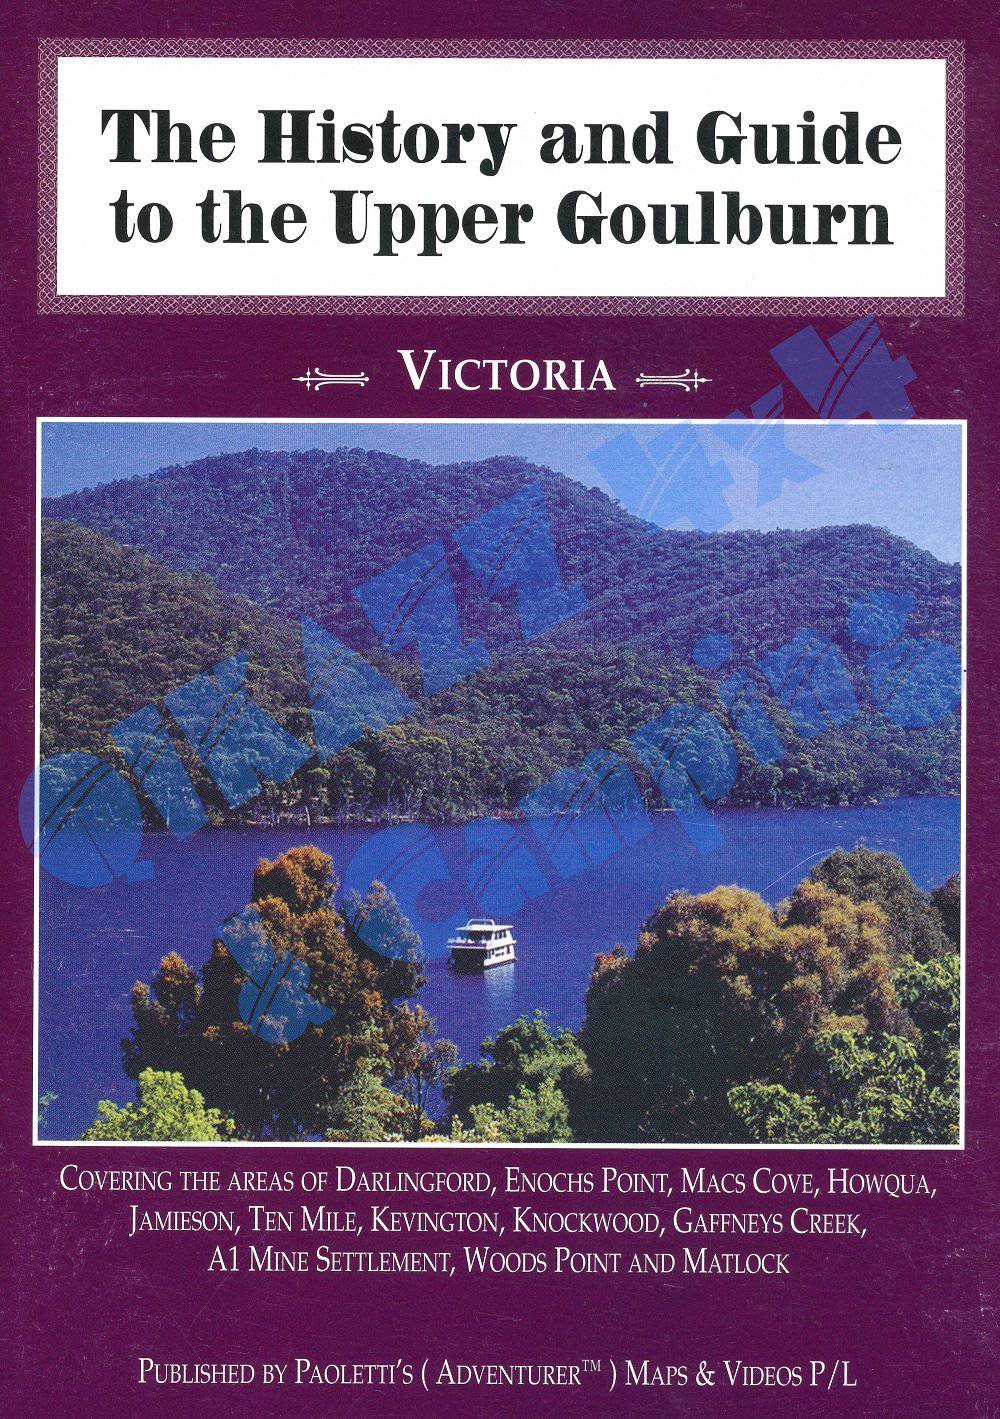 The History & Guide to the Upper Goulburn - by Adventurer Maps | Adventurer Maps